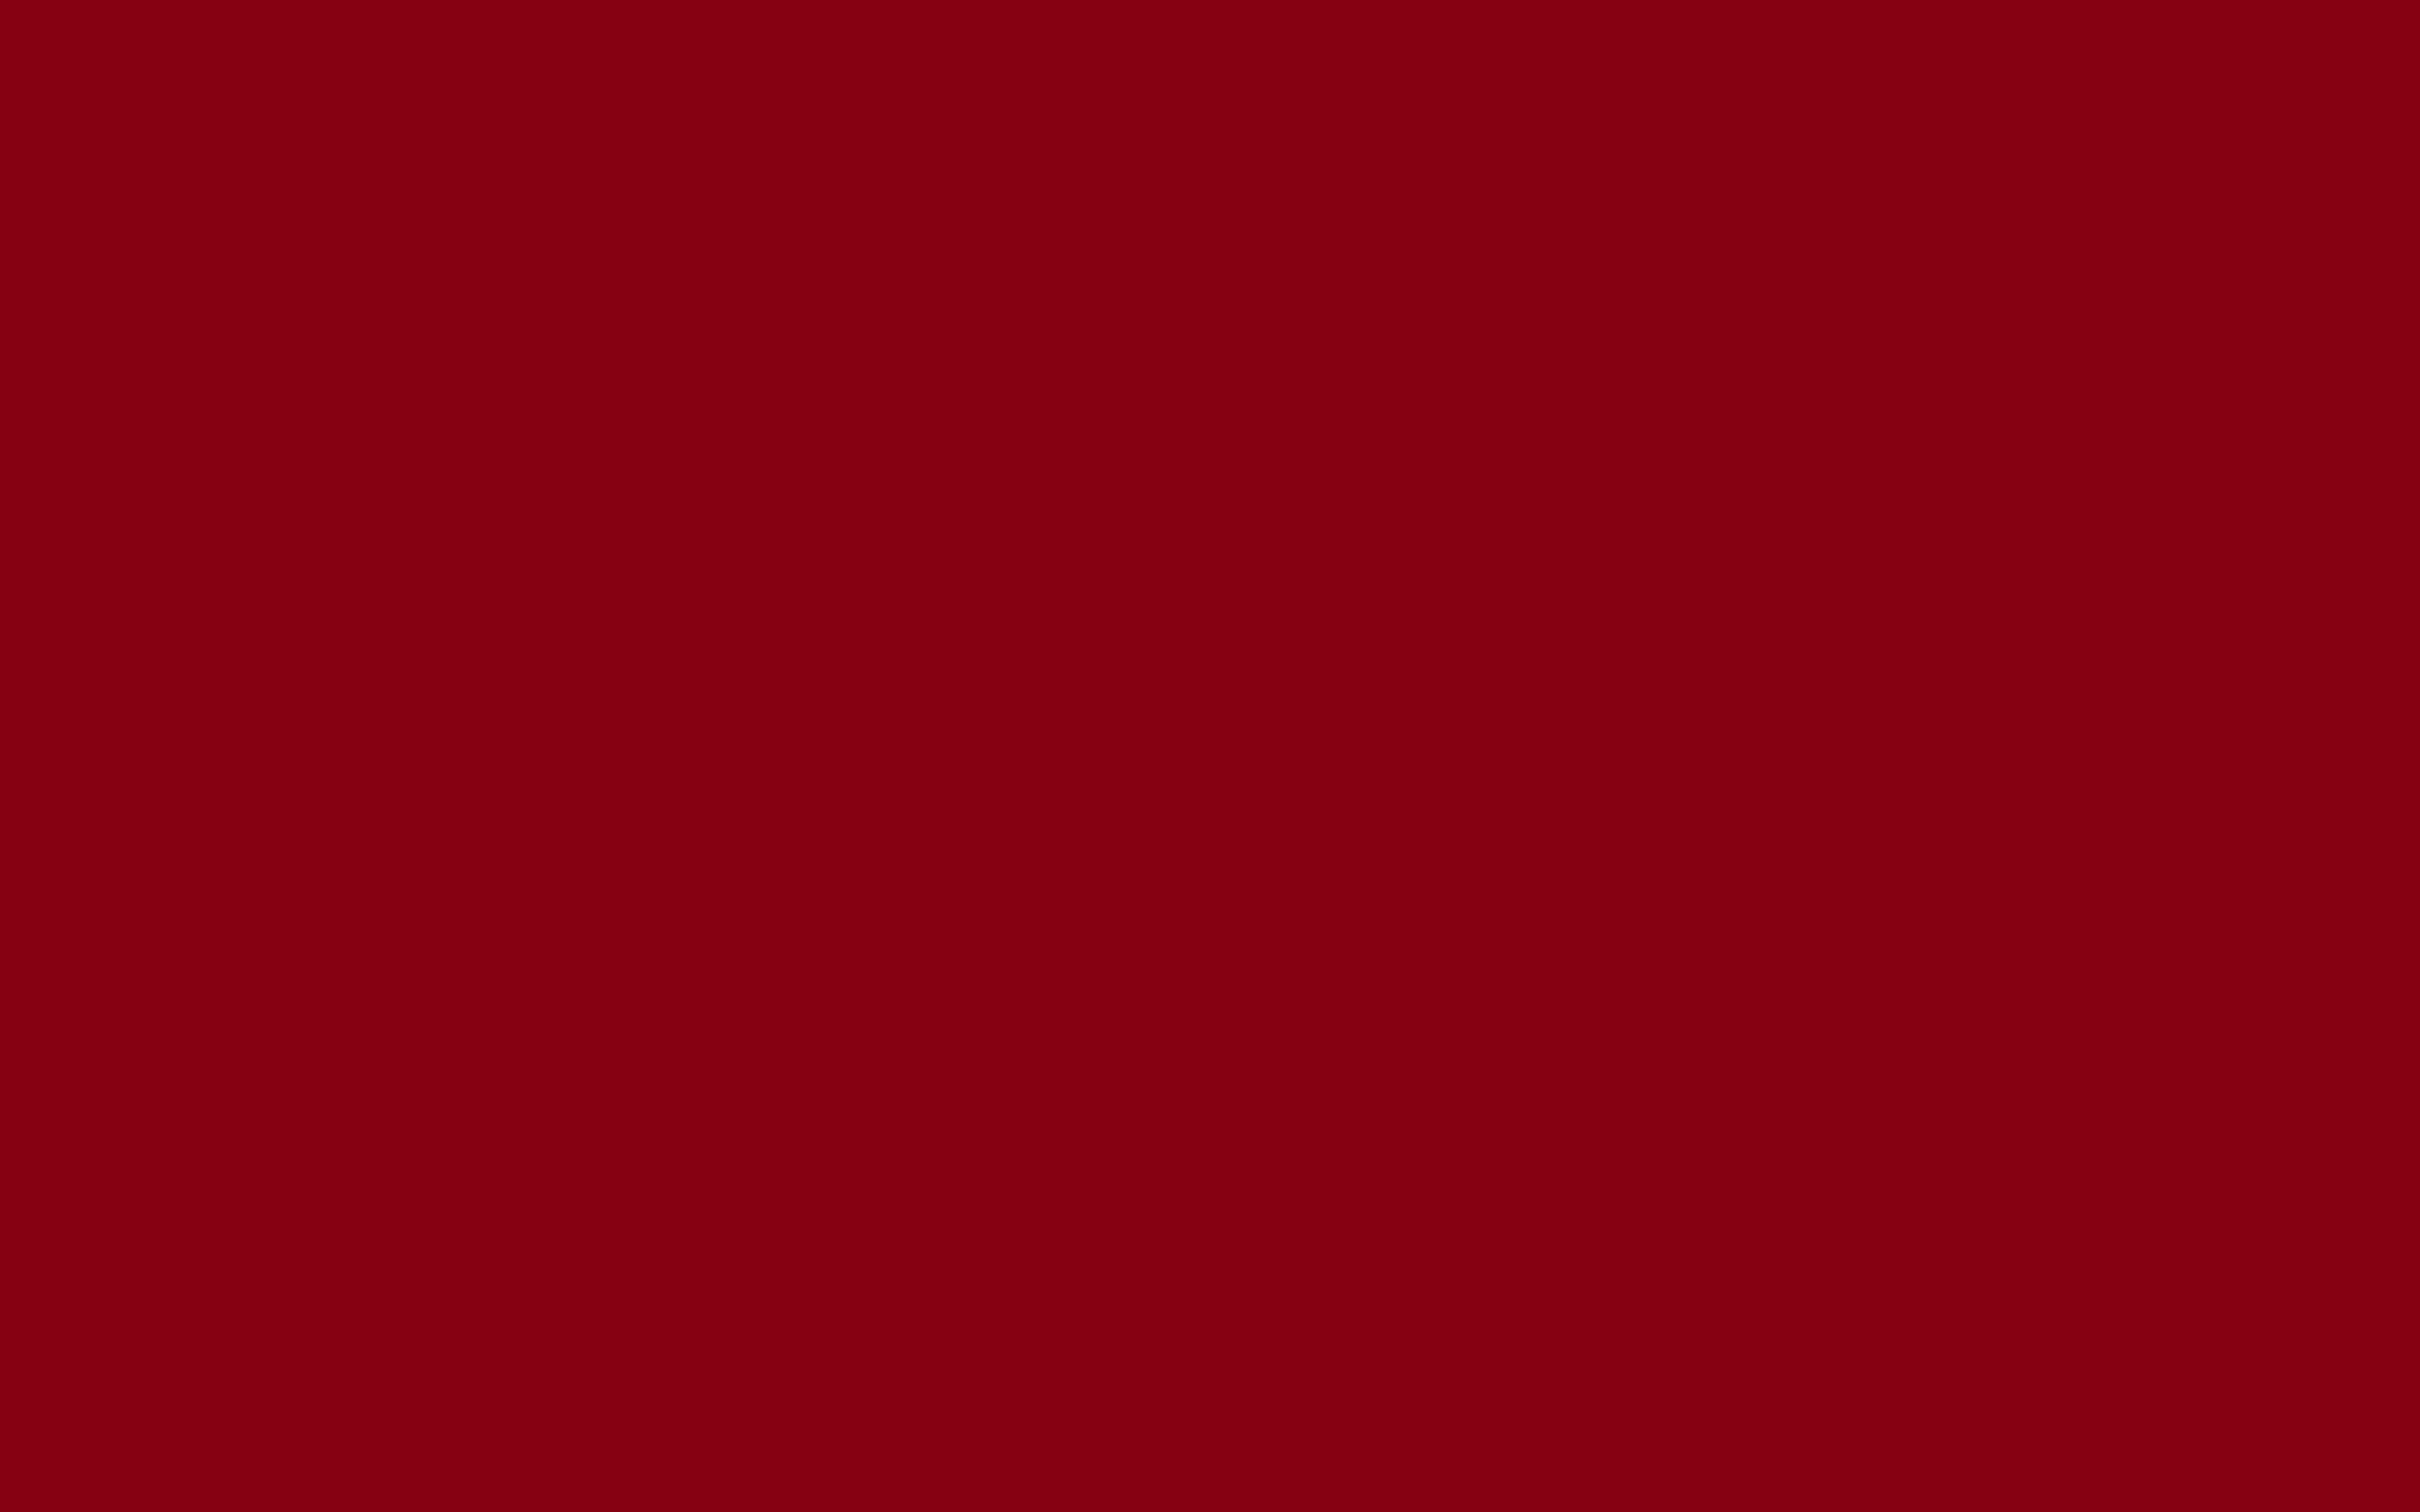 Marun dark red color plain background hd wallpapers gallery  Black 